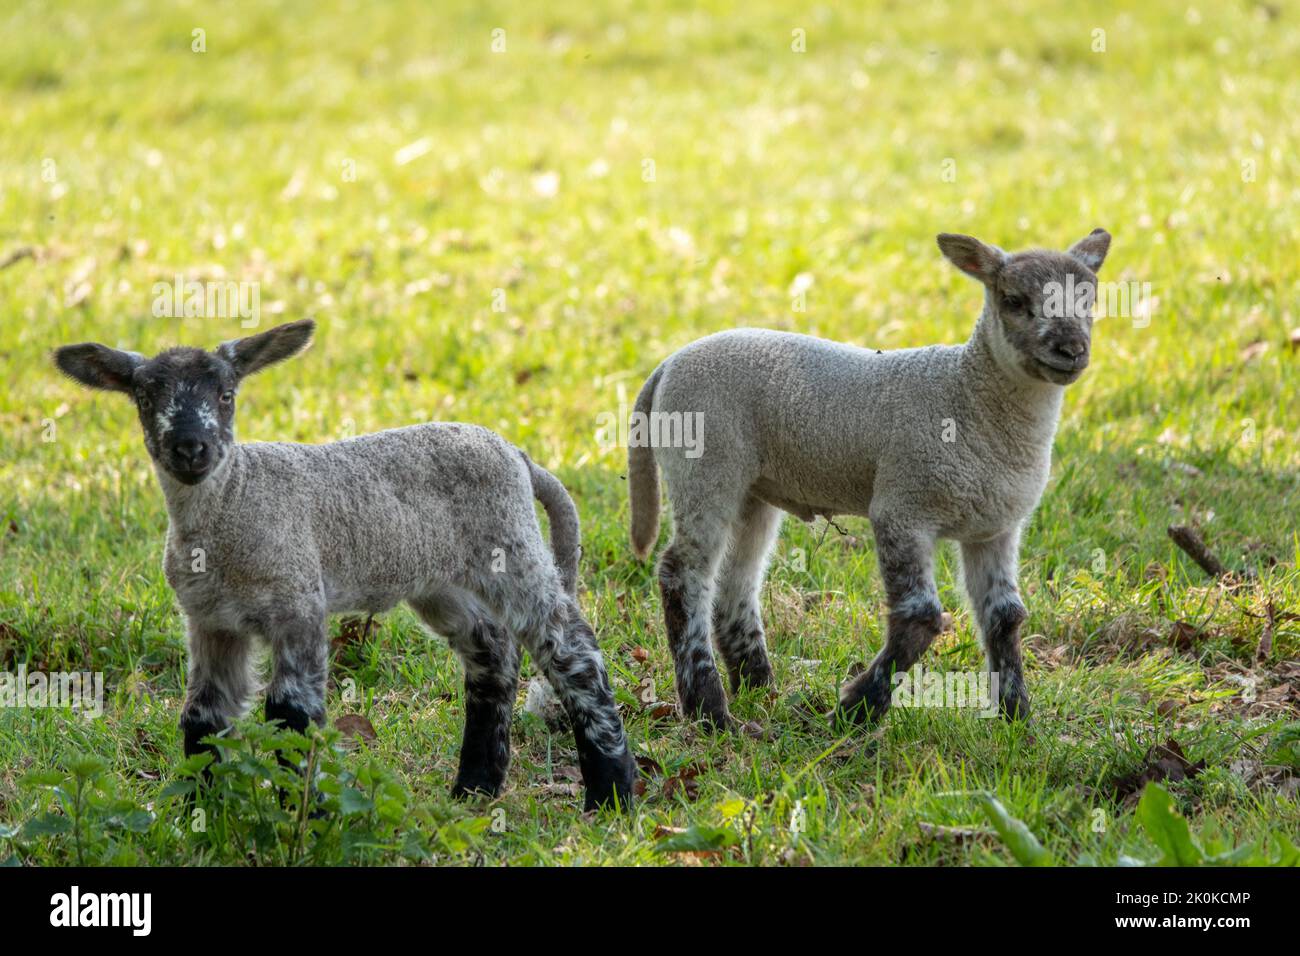 cute lambs with black legs and faces in the spring sunshine Stock Photo